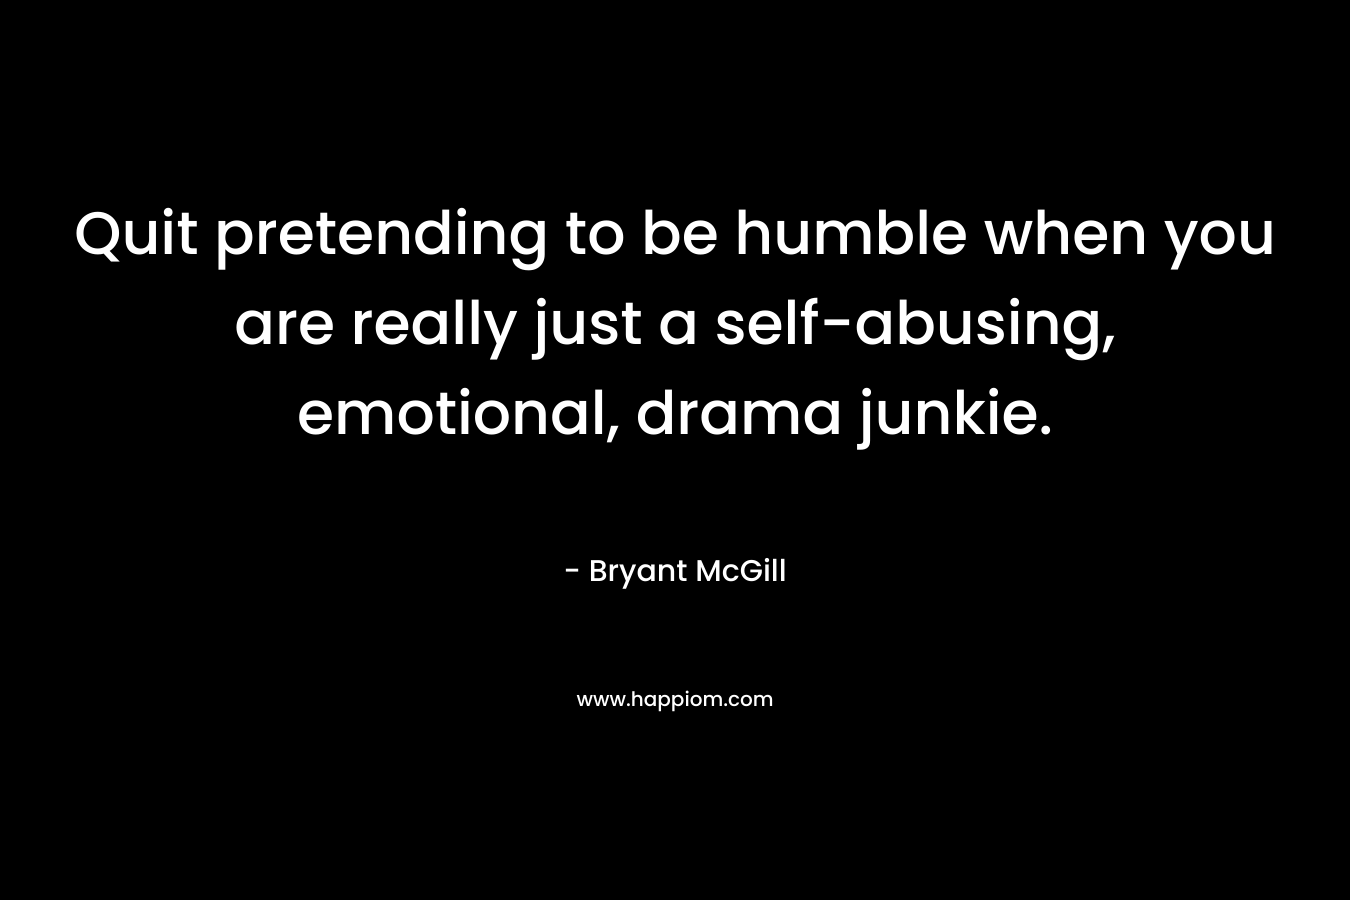 Quit pretending to be humble when you are really just a self-abusing, emotional, drama junkie.